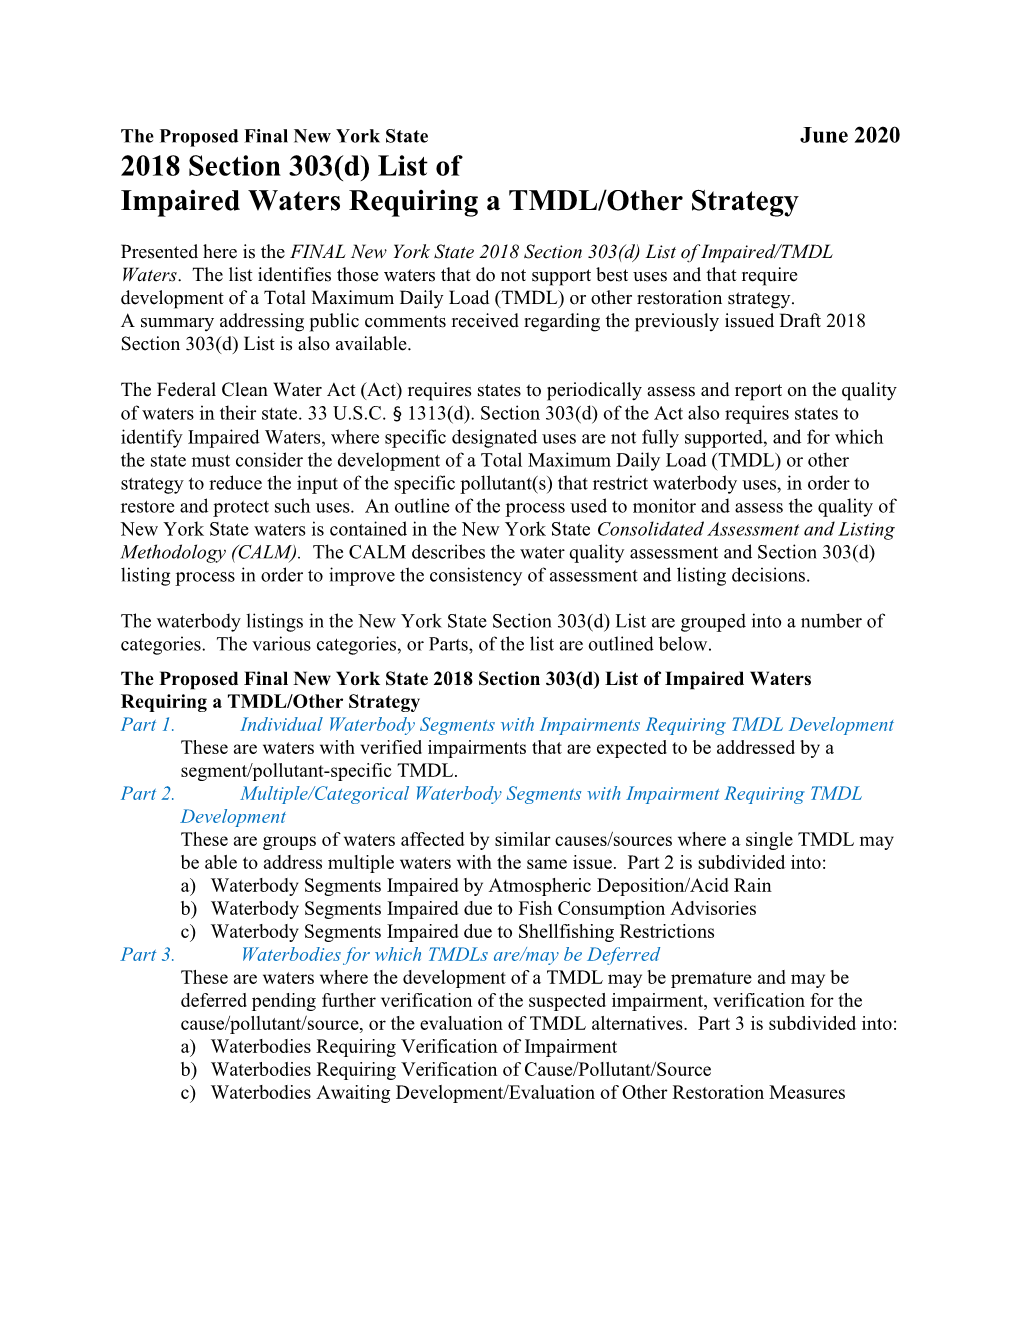 2018 Section 303(D) List of Impaired Waters Requiring a TMDL/Other Strategy